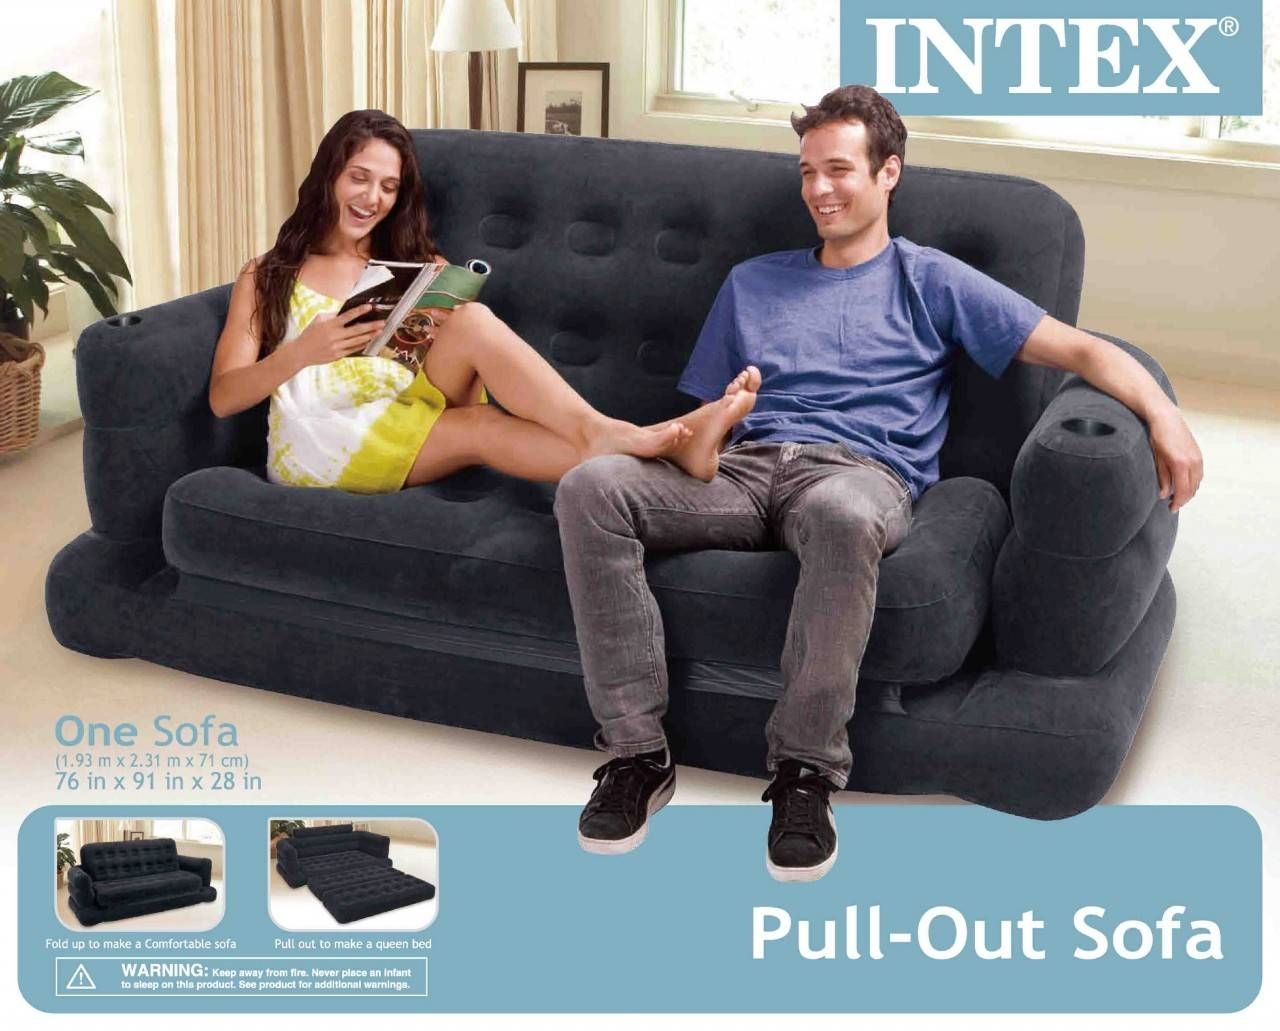 Intex Inflatable Pull Out Sofa And Queen Air Mattress Within Intex Inflatable Sofas (View 4 of 15)